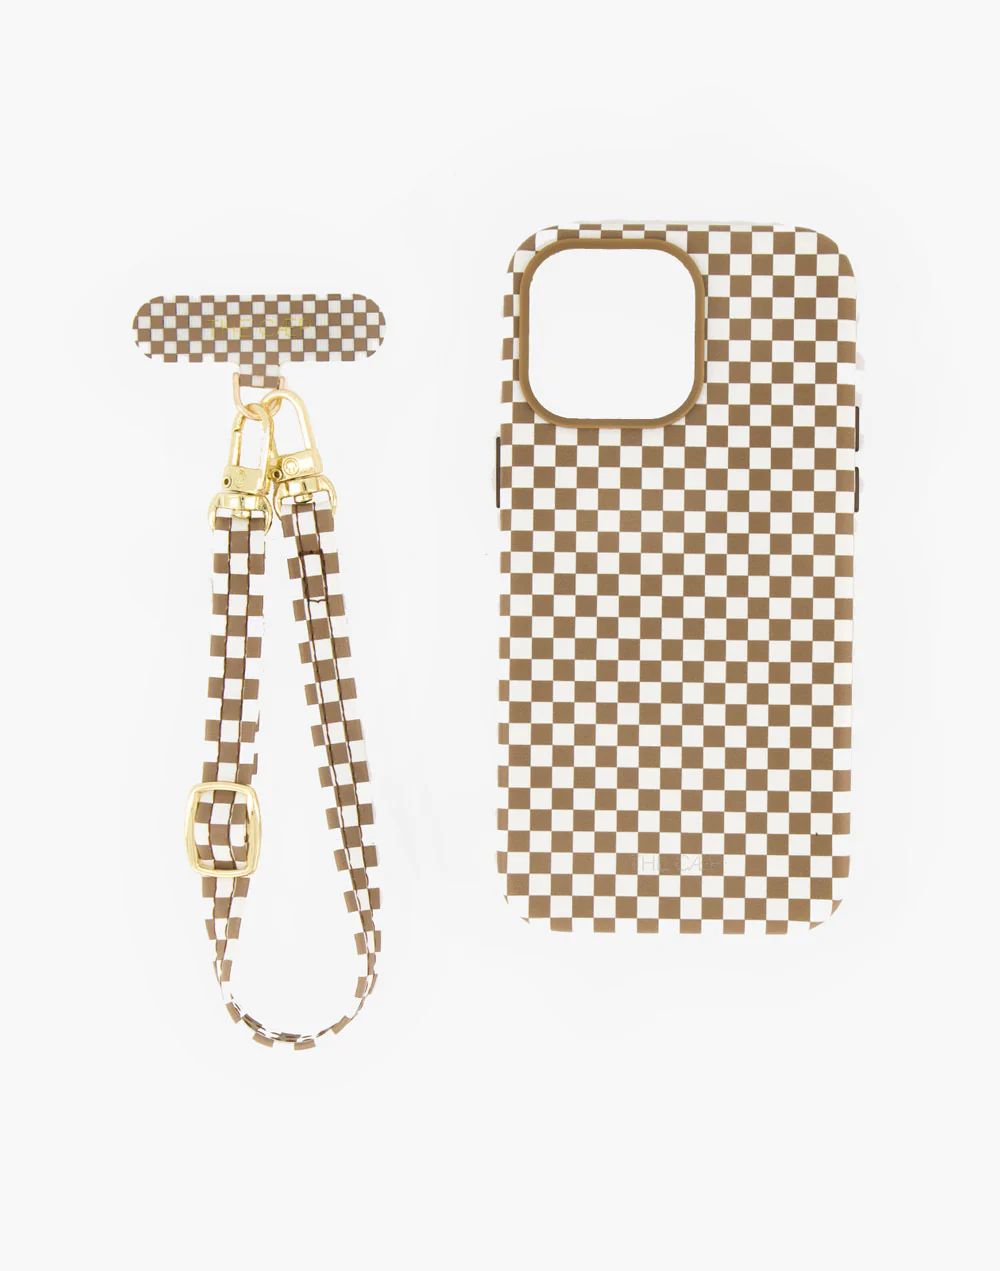 Tan Checkered Classic Case + Strap Set - MagSafe | THE CAEP